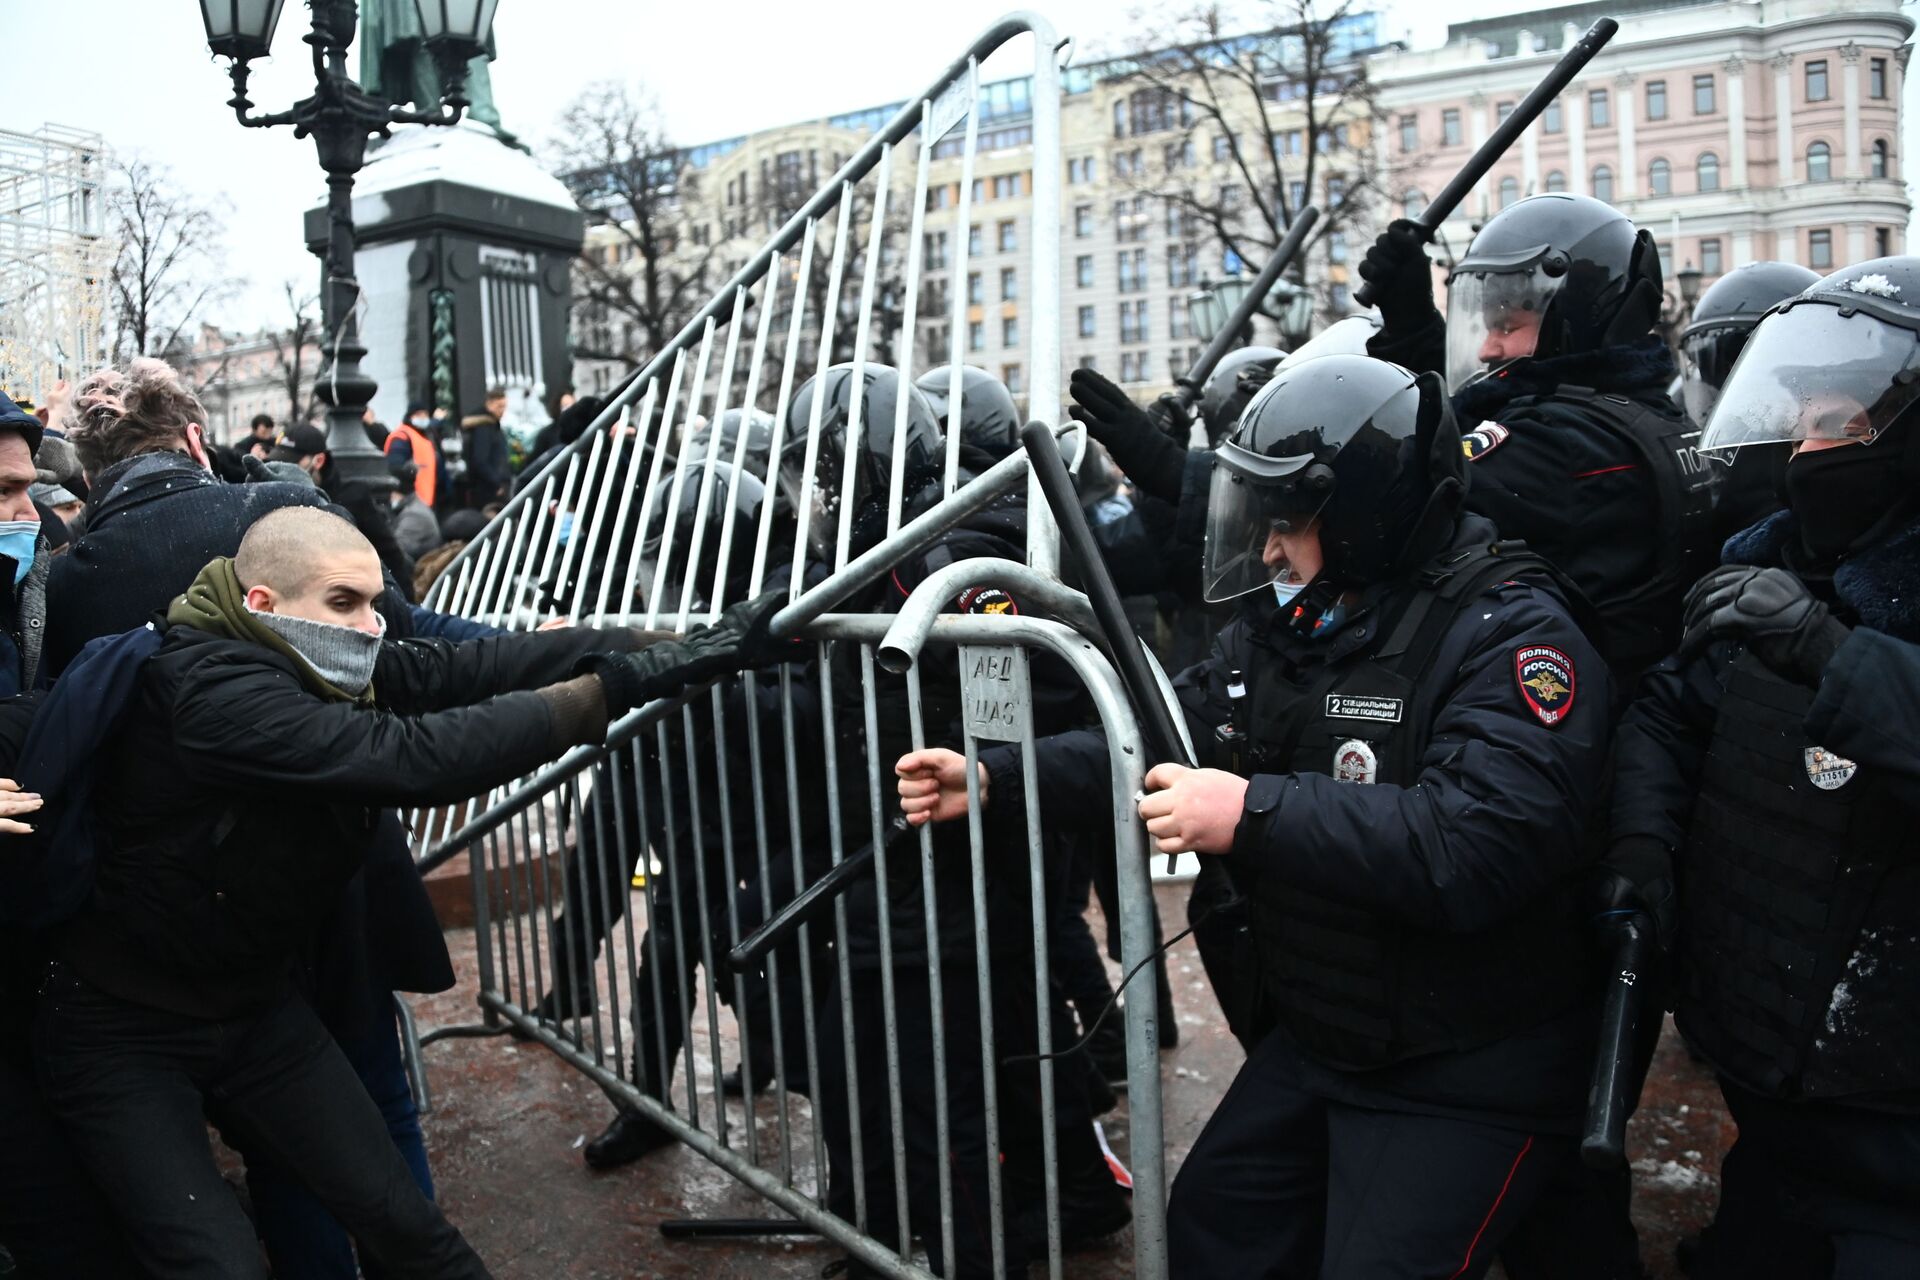 West Focuses on Russian Protests to Shift Attention From Navalny ‘Poisoning’ Case, Lavrov Says - Sputnik International, 1920, 05.02.2021